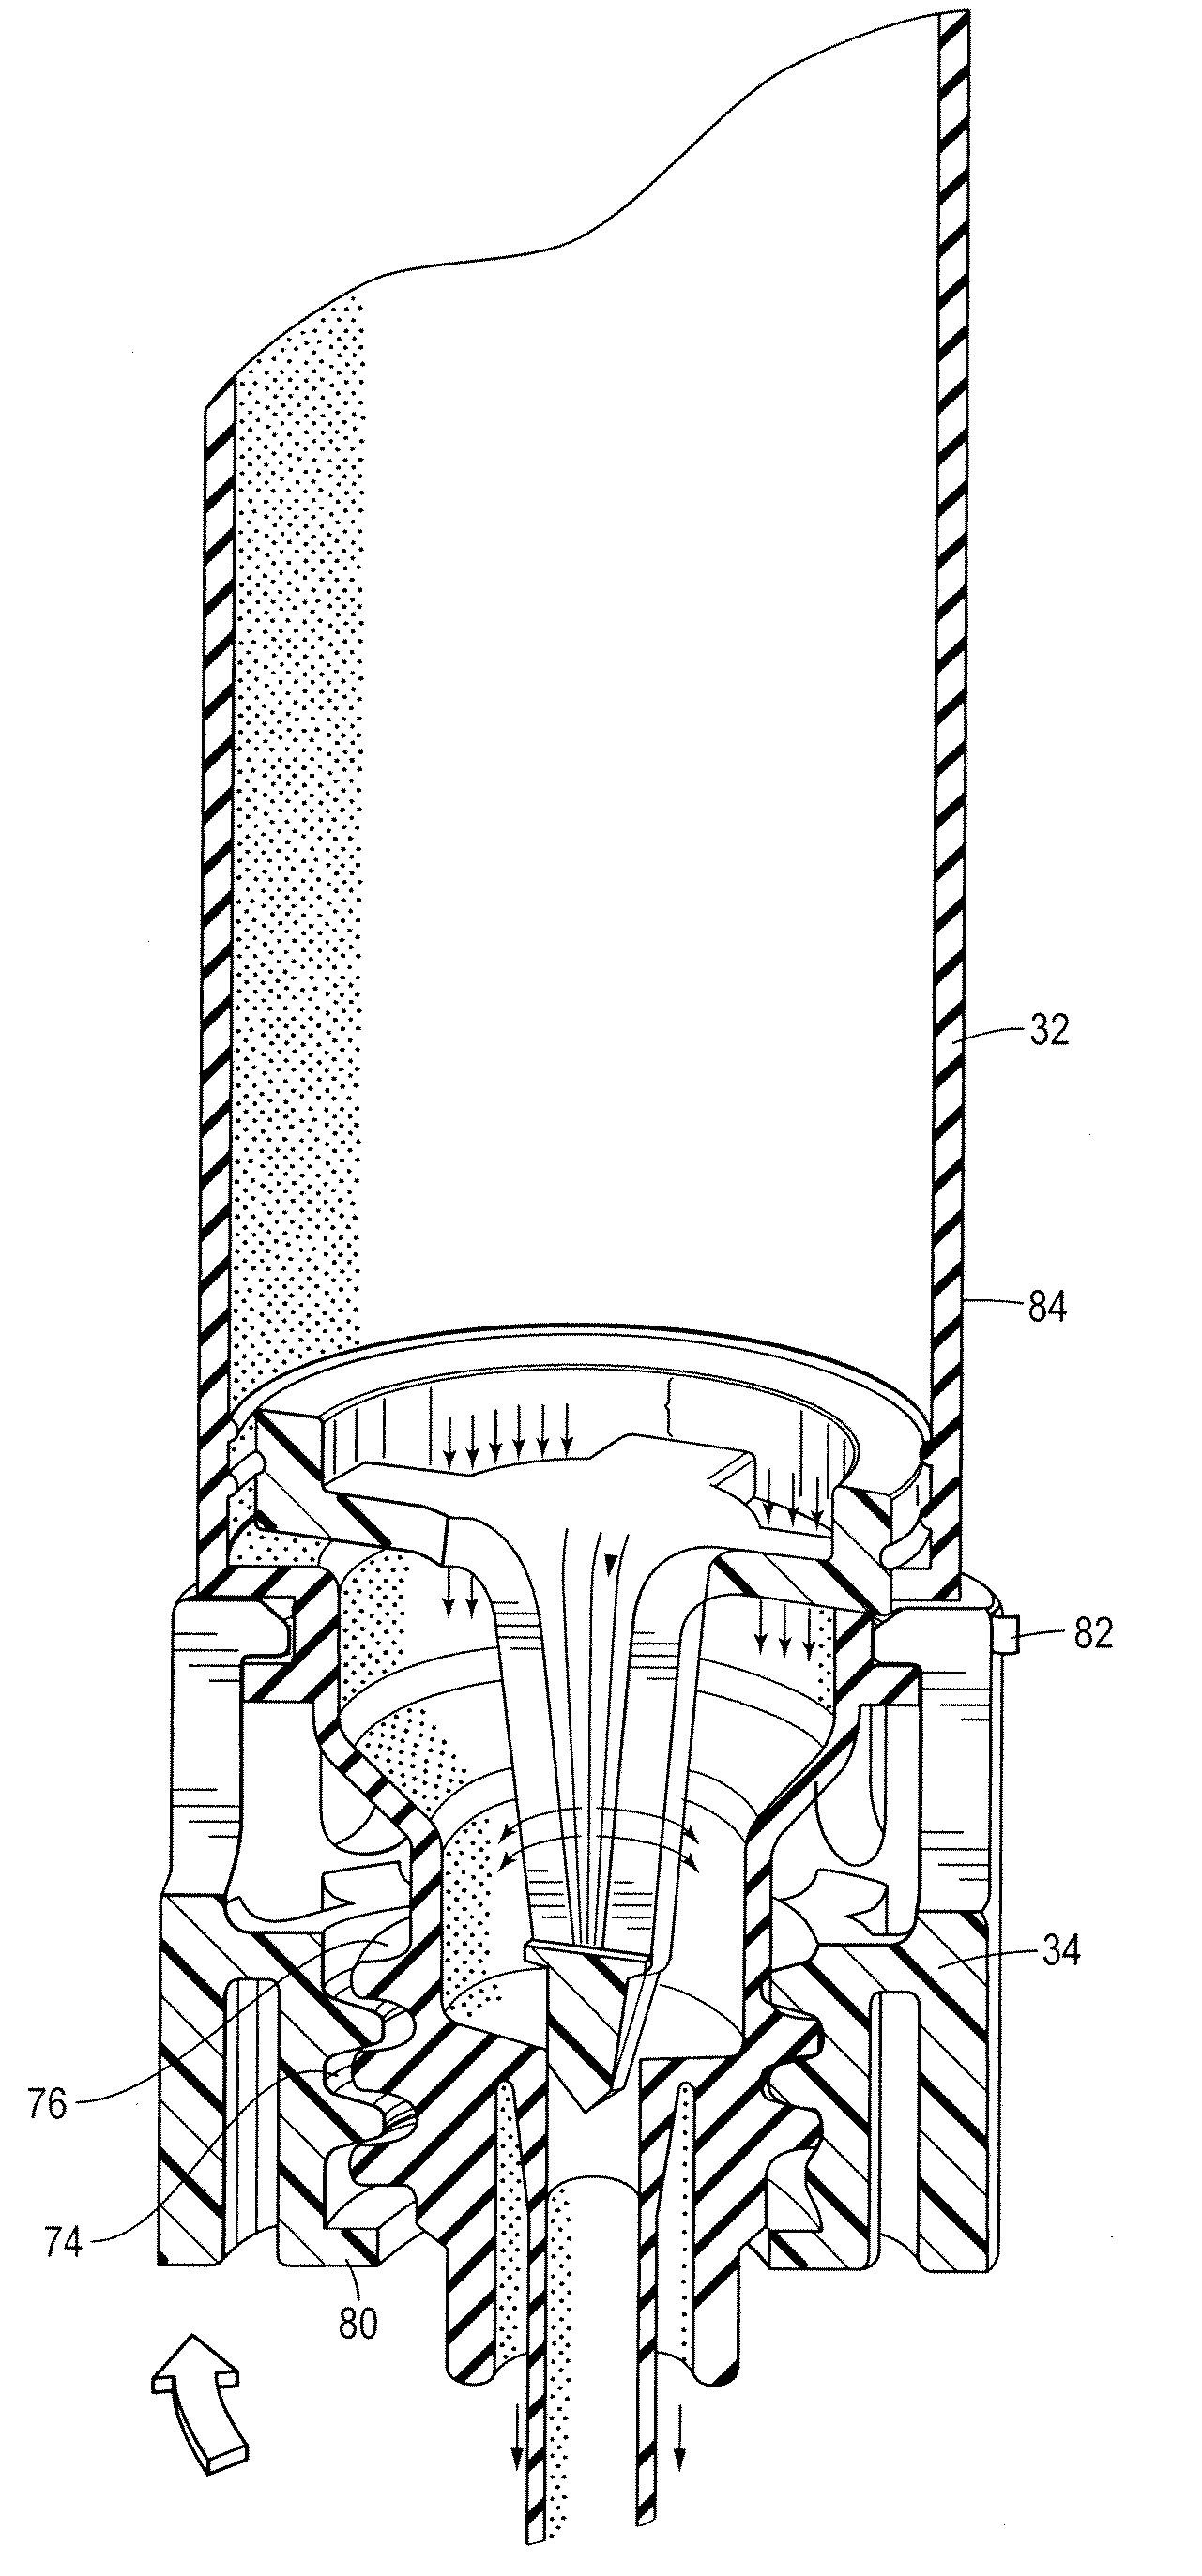 Drip chamber with flow control